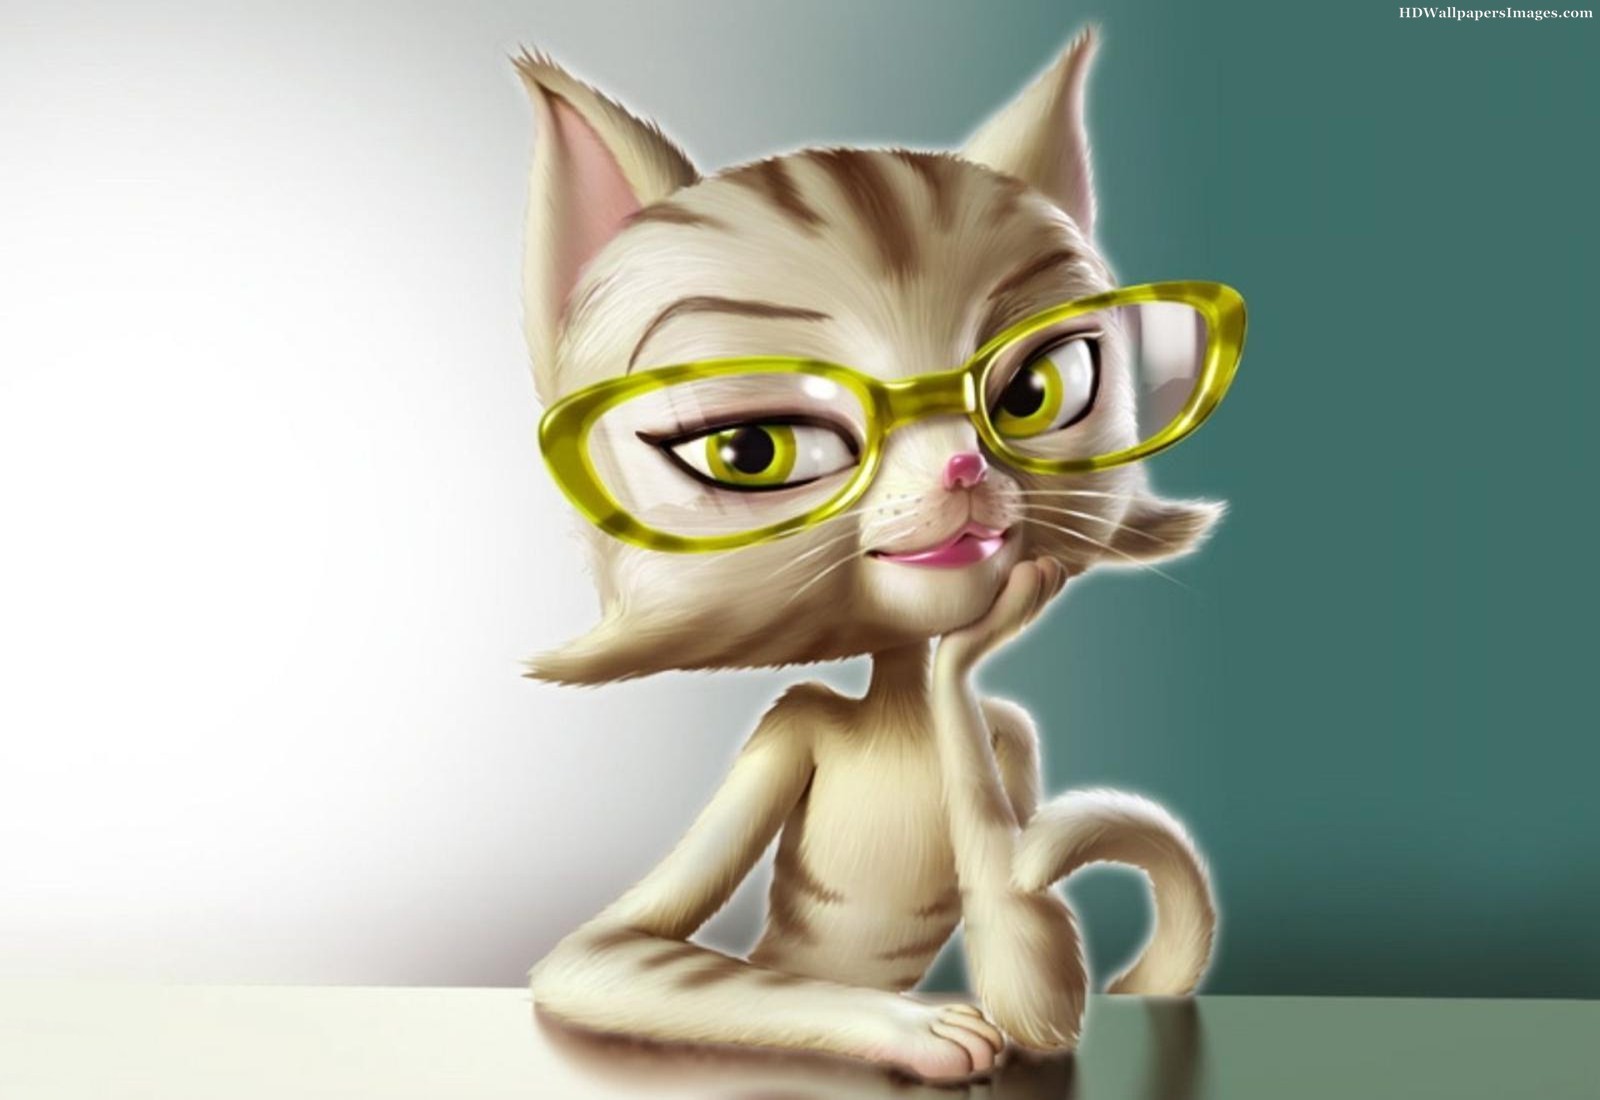 3D Cartoon Cat Thinking Images | HD Wallpapers Images